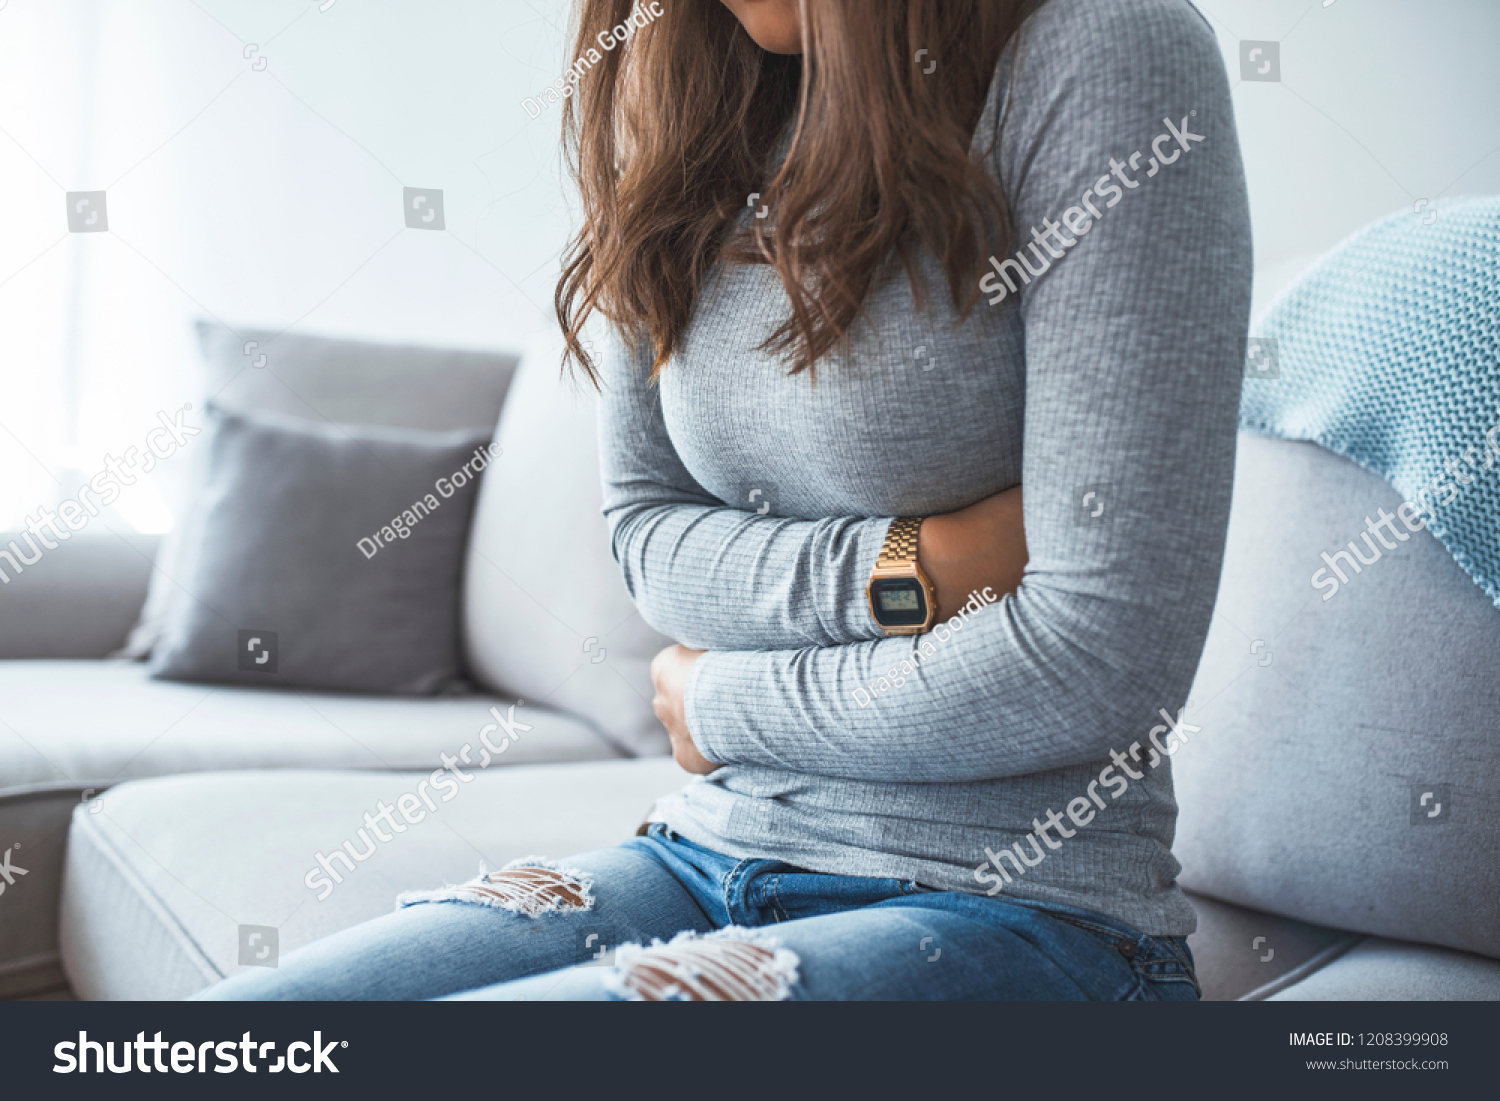 Woman lying on sofa looking sick in the living room. Beautiful young woman lying on bed and holding hands on her stomach. Woman having painful stomachache on bed, Menstrual period #1208399908